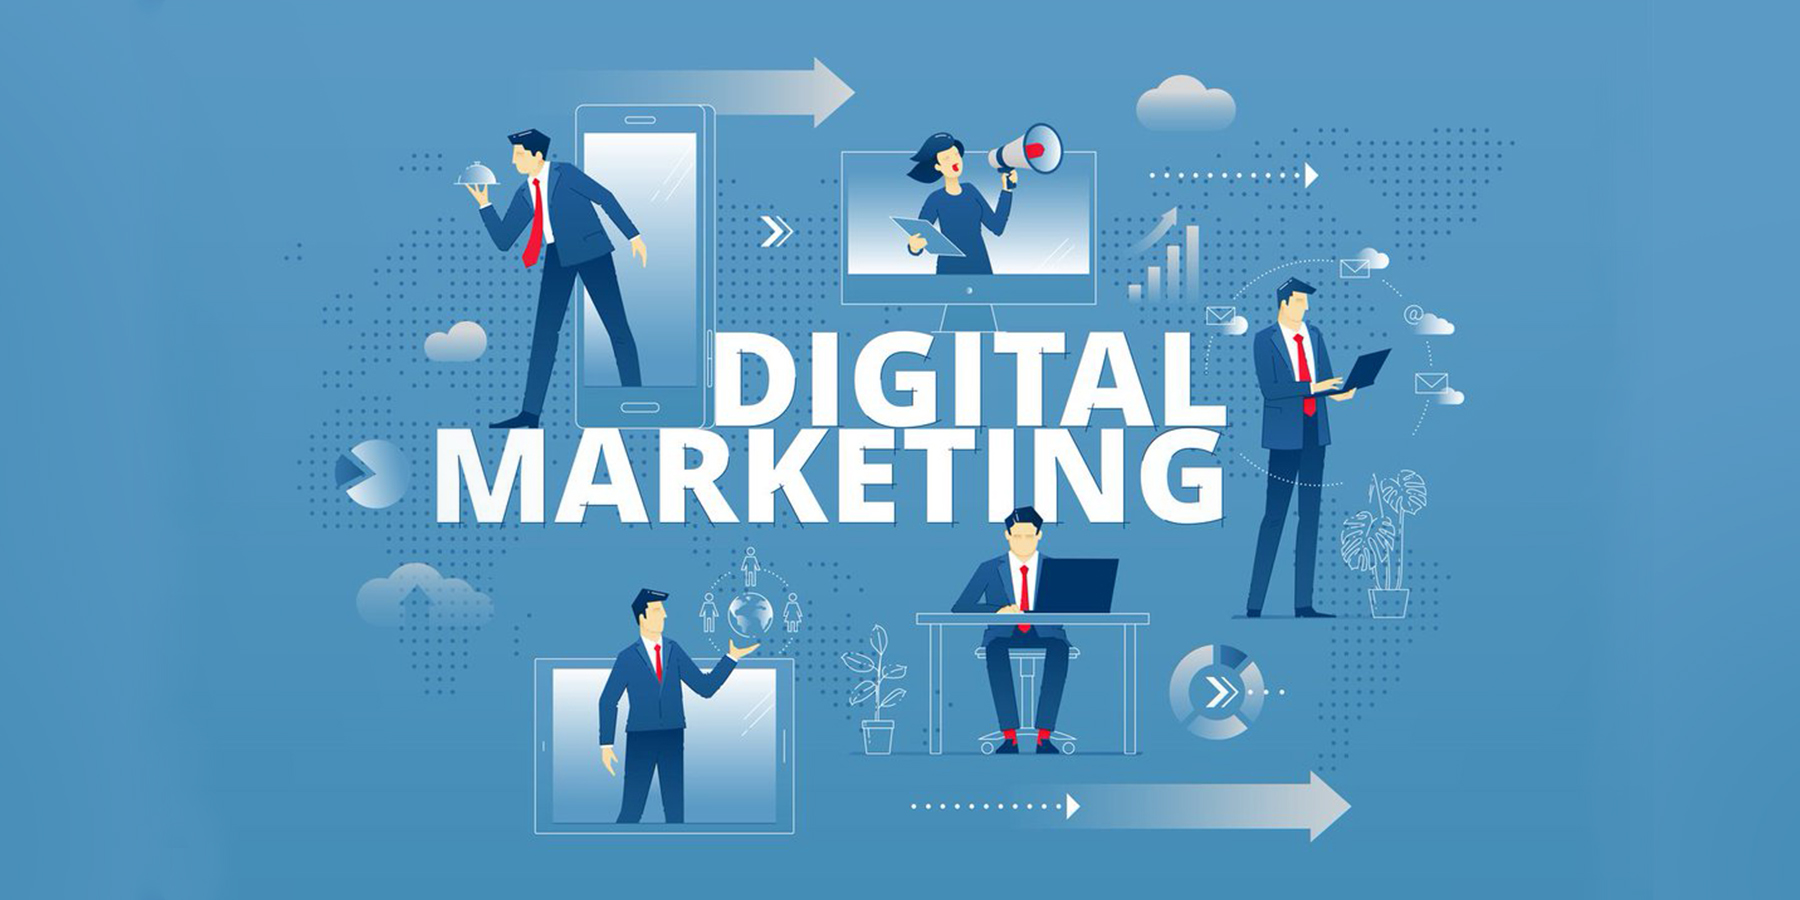 5 ways in which Digital Marketing can help you